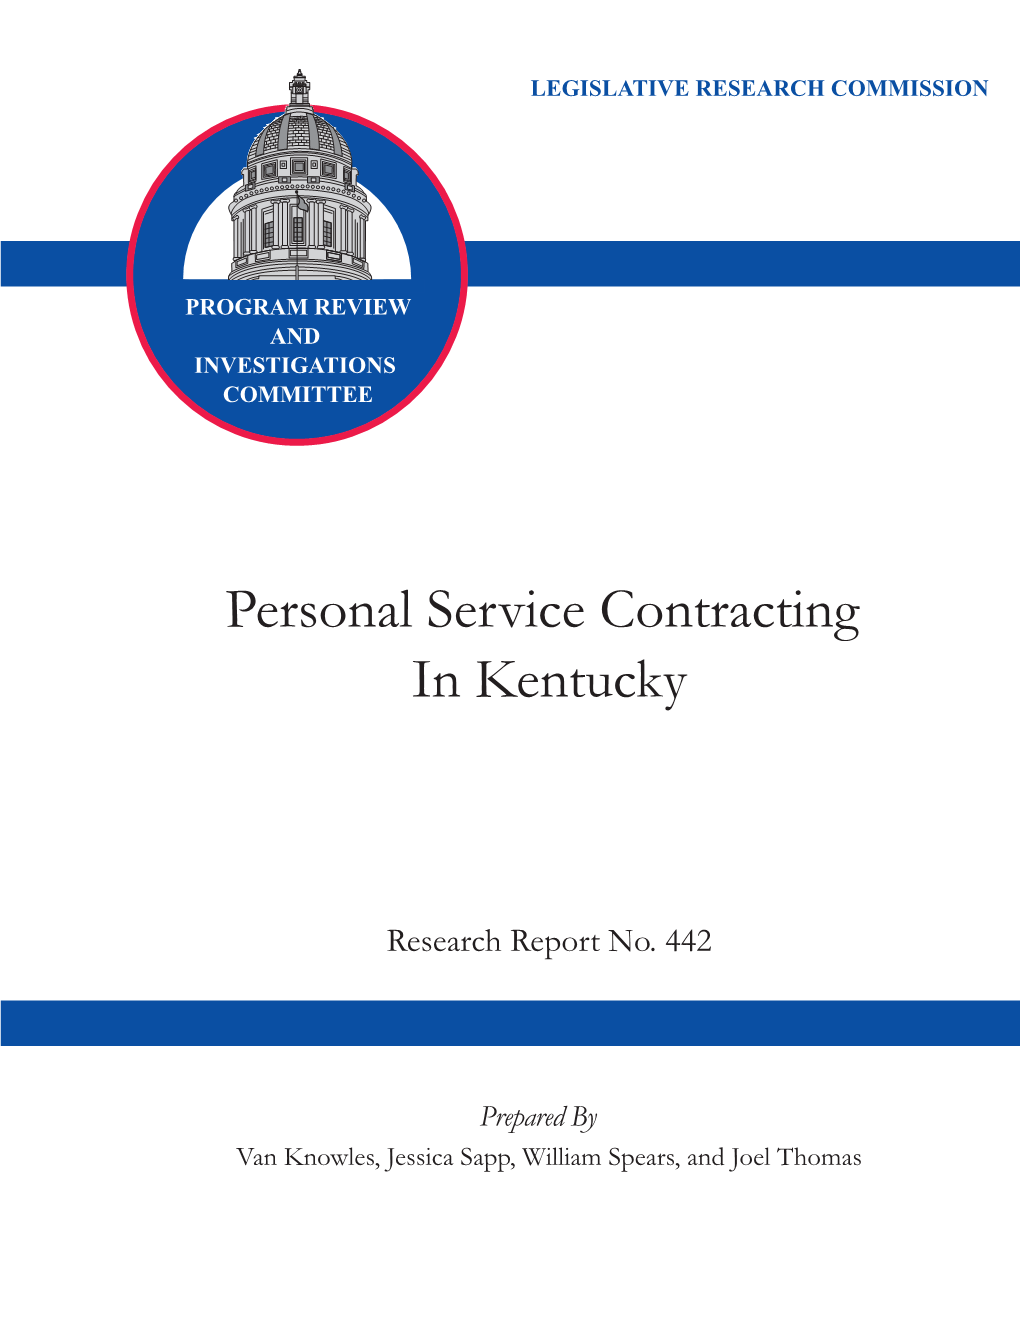 Personal Service Contracting in Kentucky